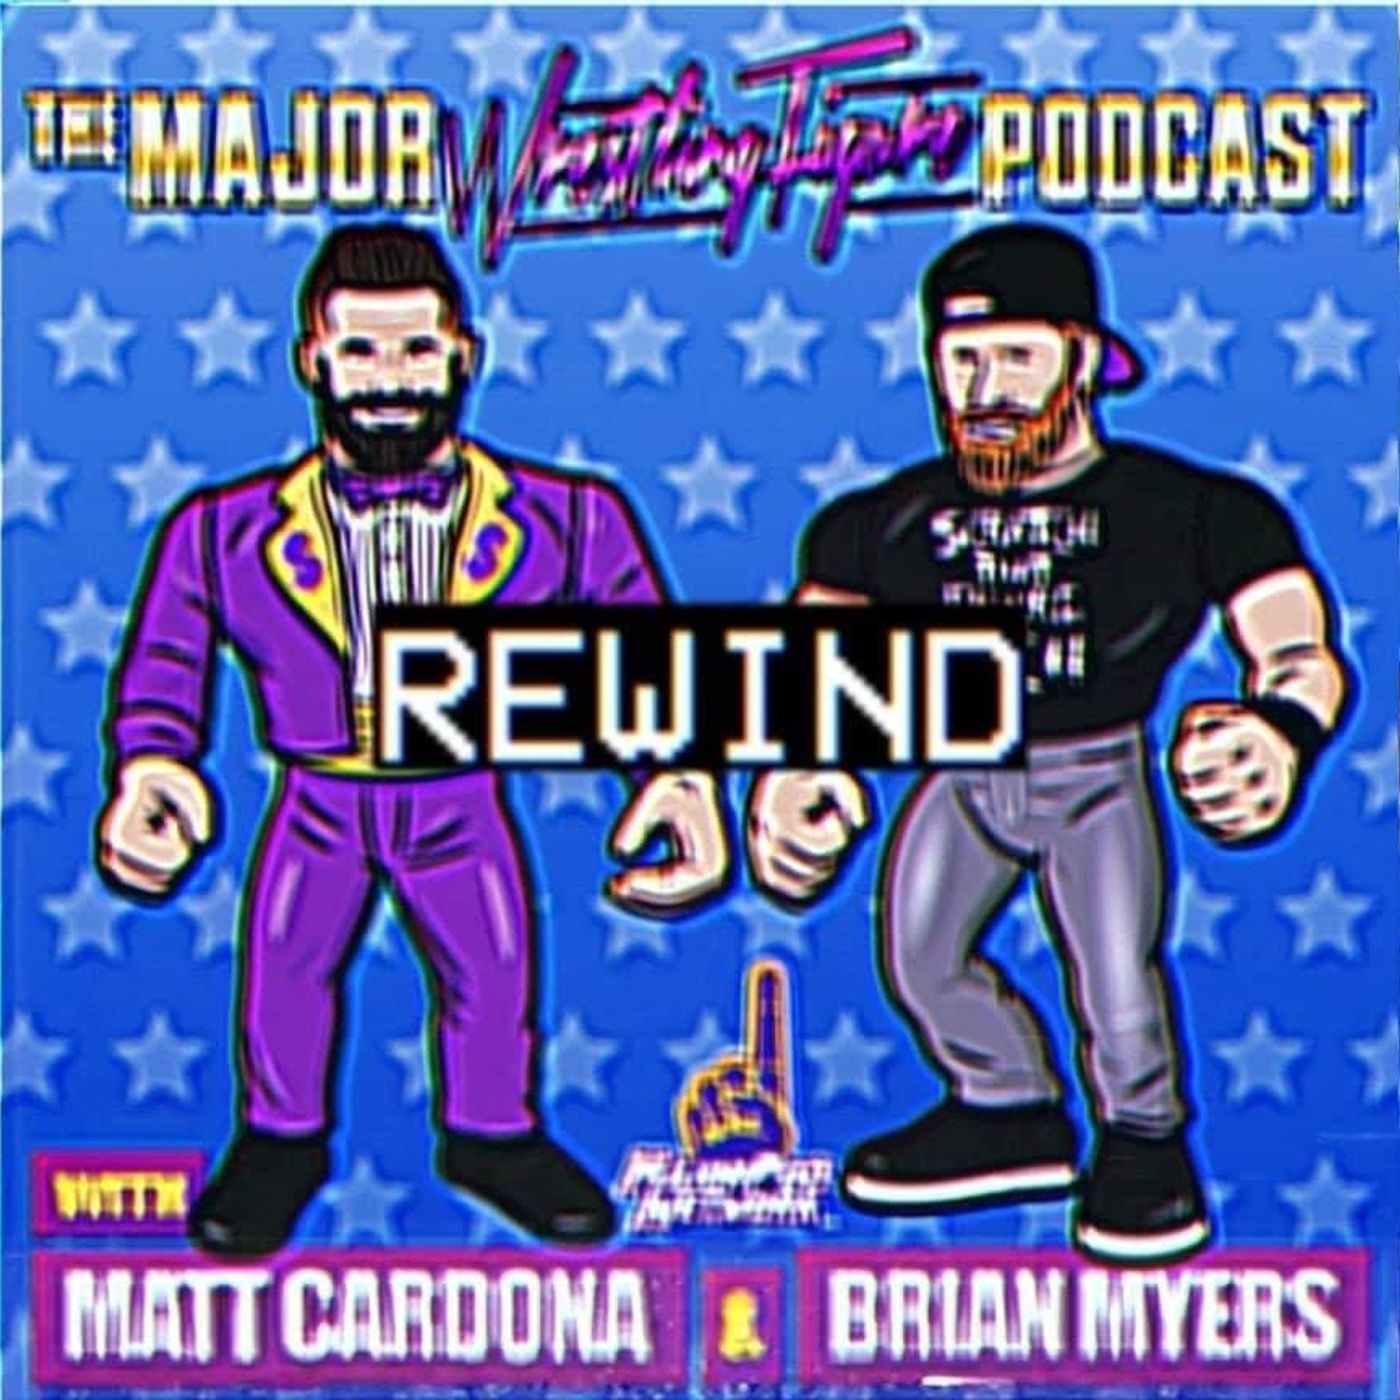 MWFP Rewind 56 - Kurt Angle and The Rock? Go Ducks!HUGE Mania sized weekly purchases including some whooping buys from the major marks! (139